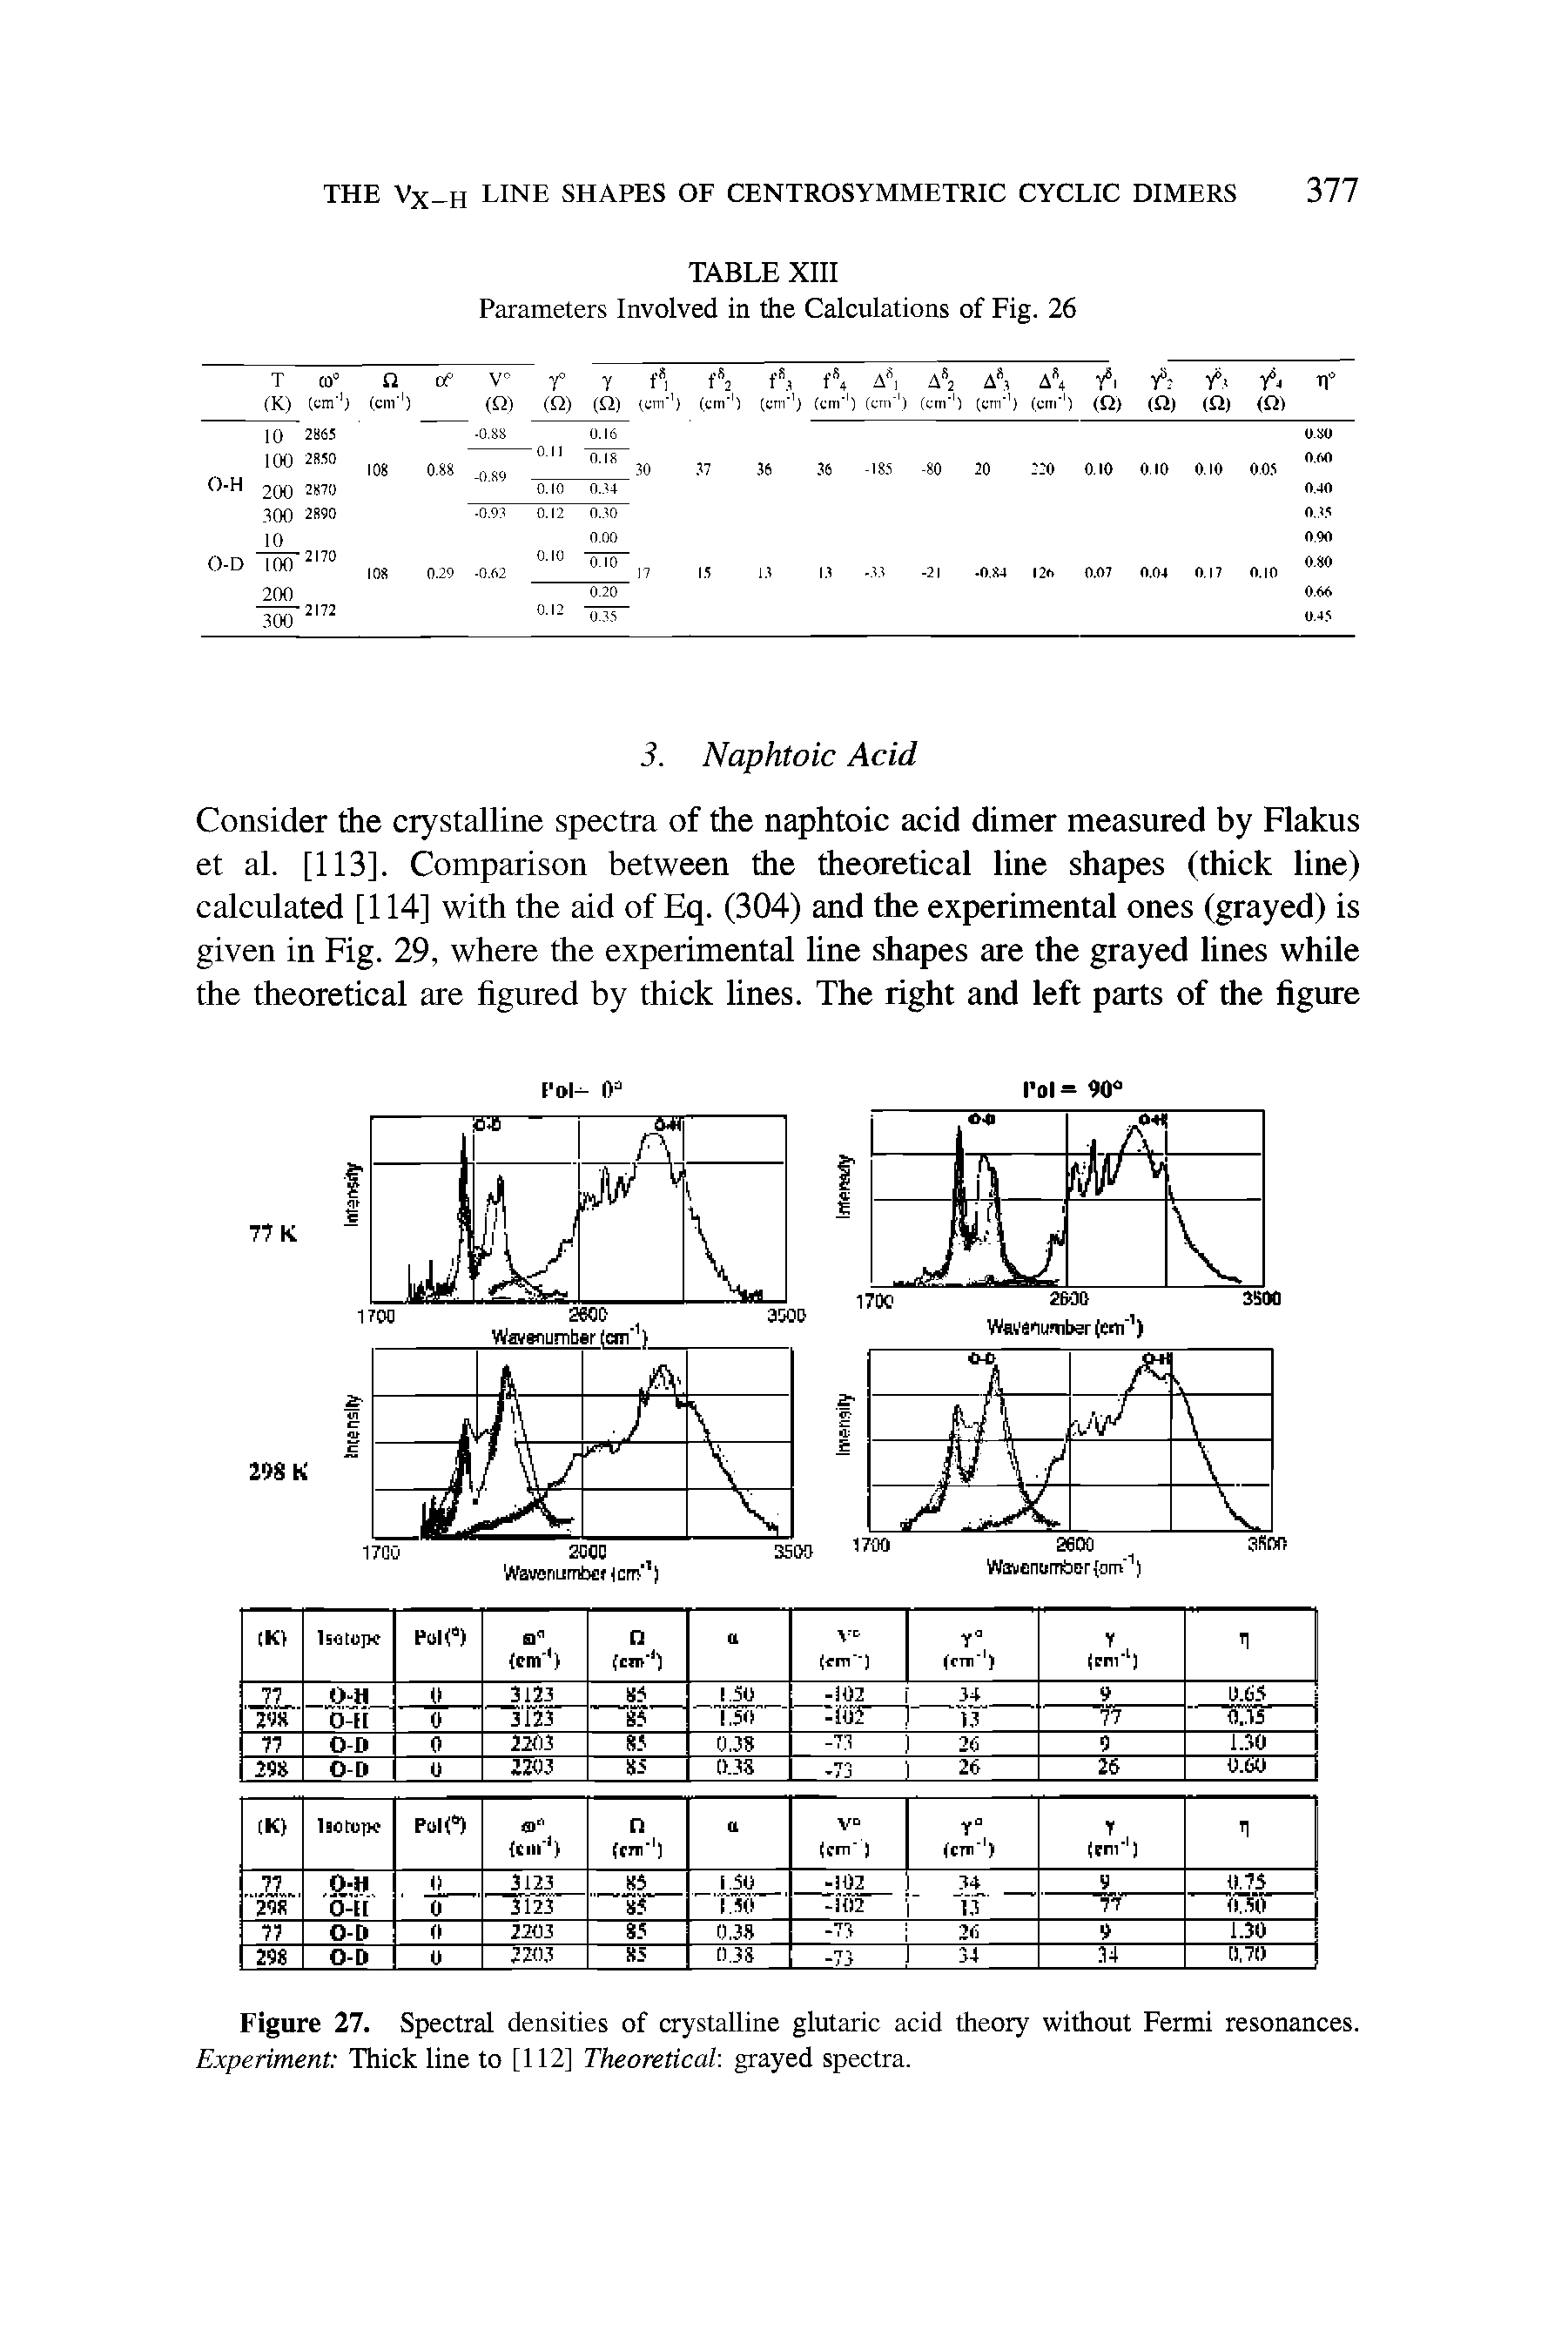 Figure 27. Spectral densities of crystalline glutaric acid theory without Fermi resonances. Experiment Thick line to [112] Theoretical, grayed spectra.